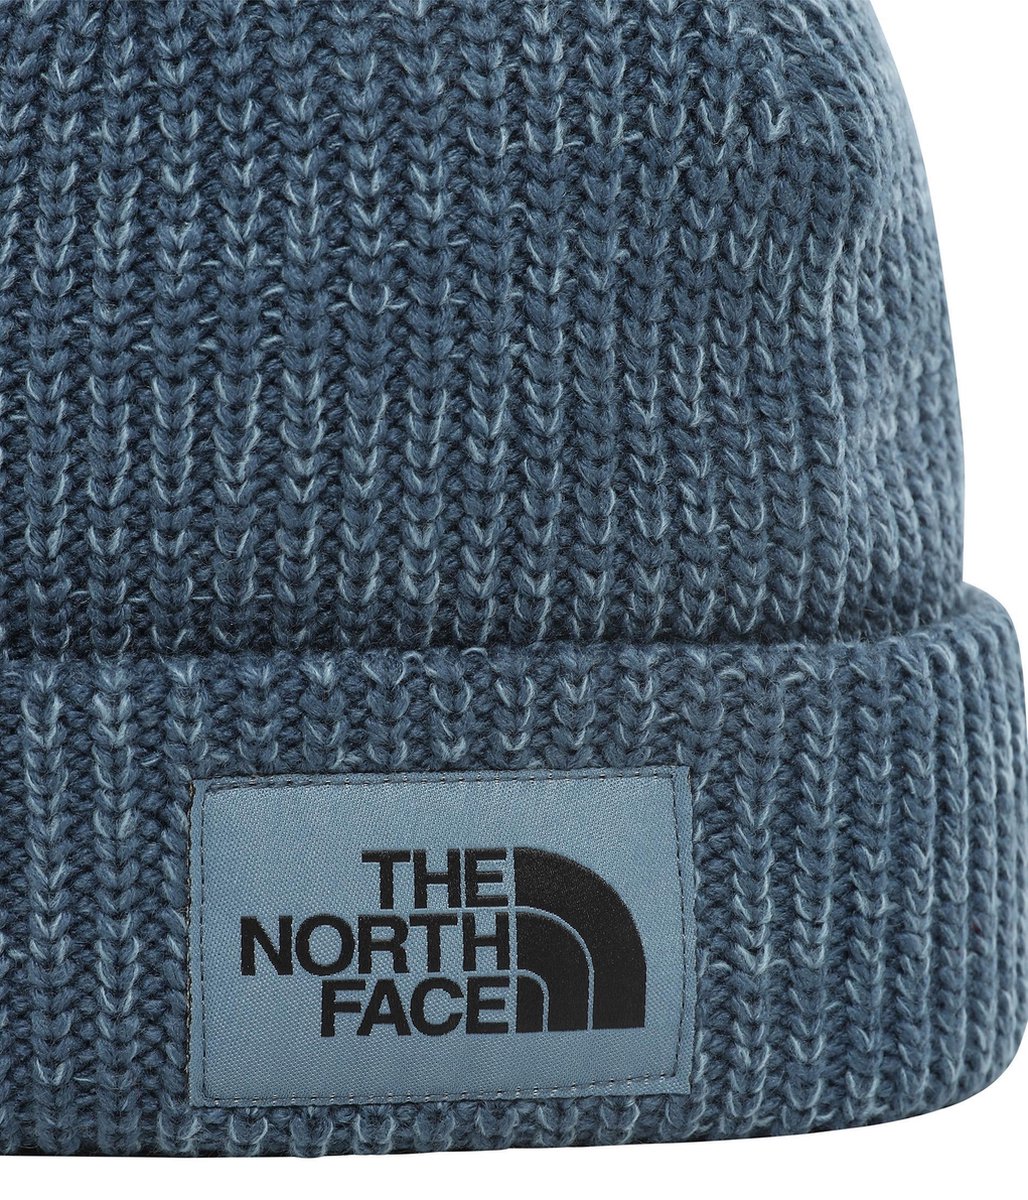 kromme chaos Monet The North Face Salty Dog Beanie Unisex Muts - Blue Wing Teal/Bluestone -  One size | bol.com